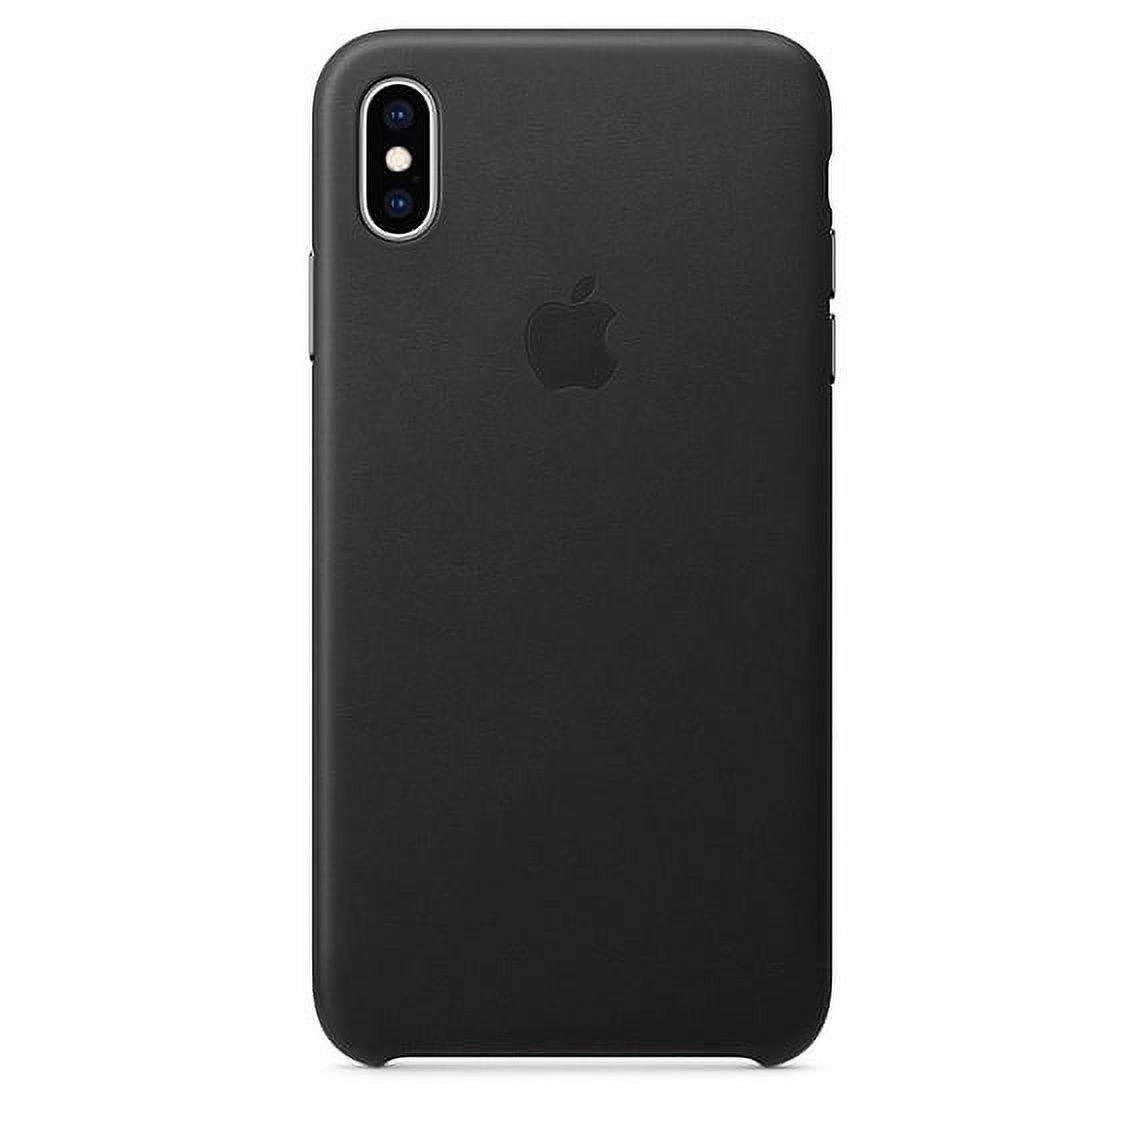 Apple Leather Case for iPhone XS Max - Black - image 1 of 8